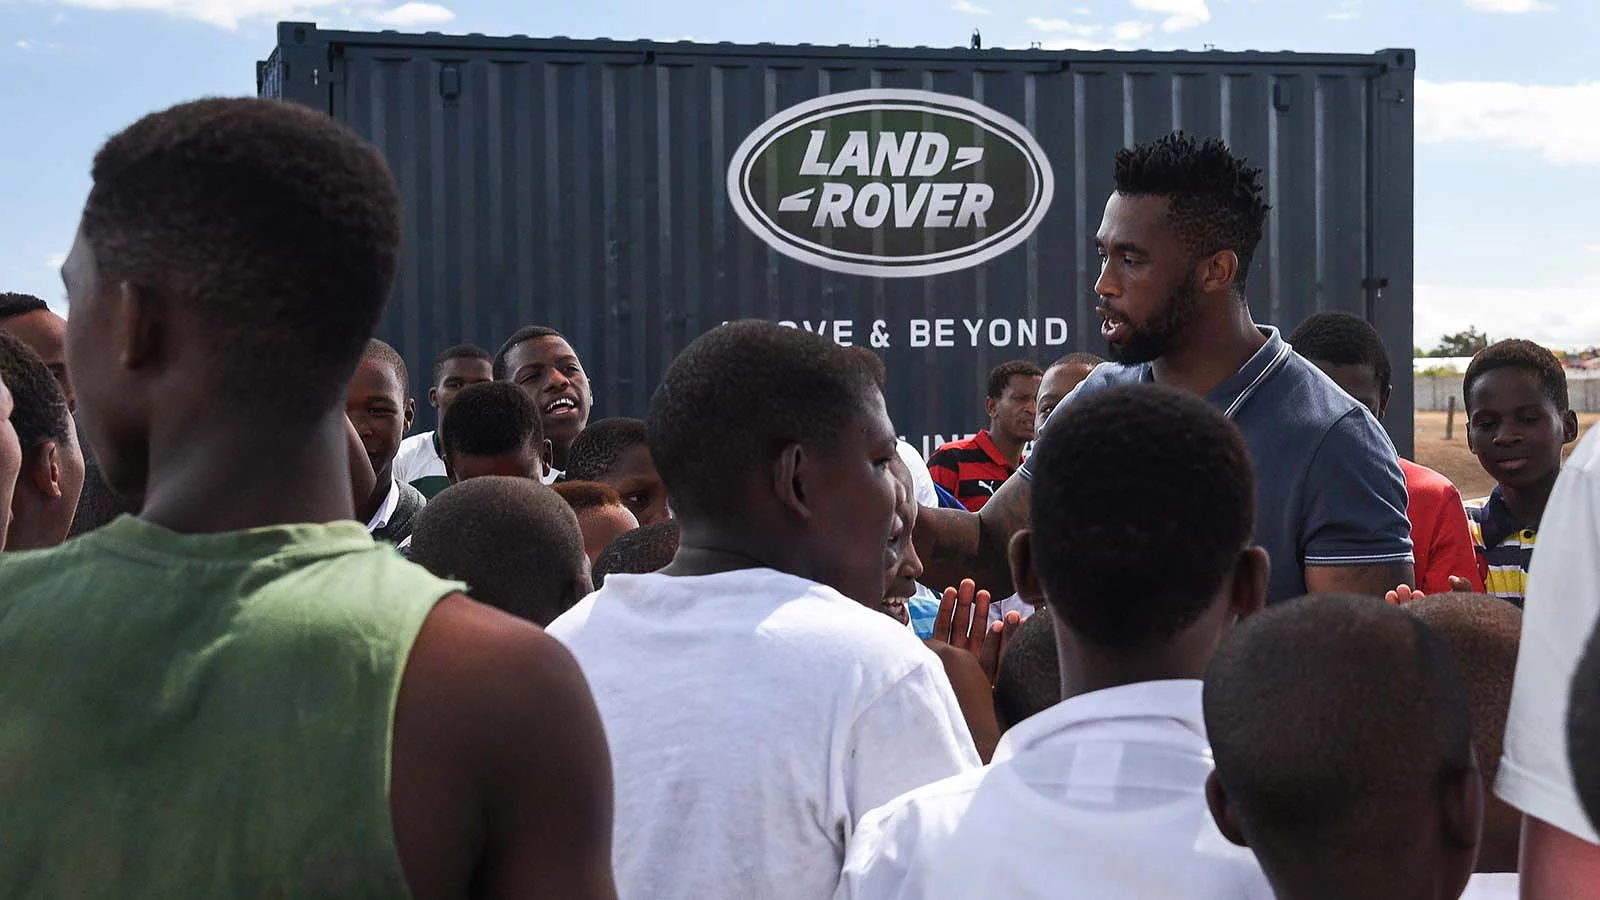 SPRINGBOK AND STORMERS RUGBY PLAYER, AND LAND ROVER AMBASSADOR SIYA KOLISI MAKES RURAL RUGBY DELIVERY